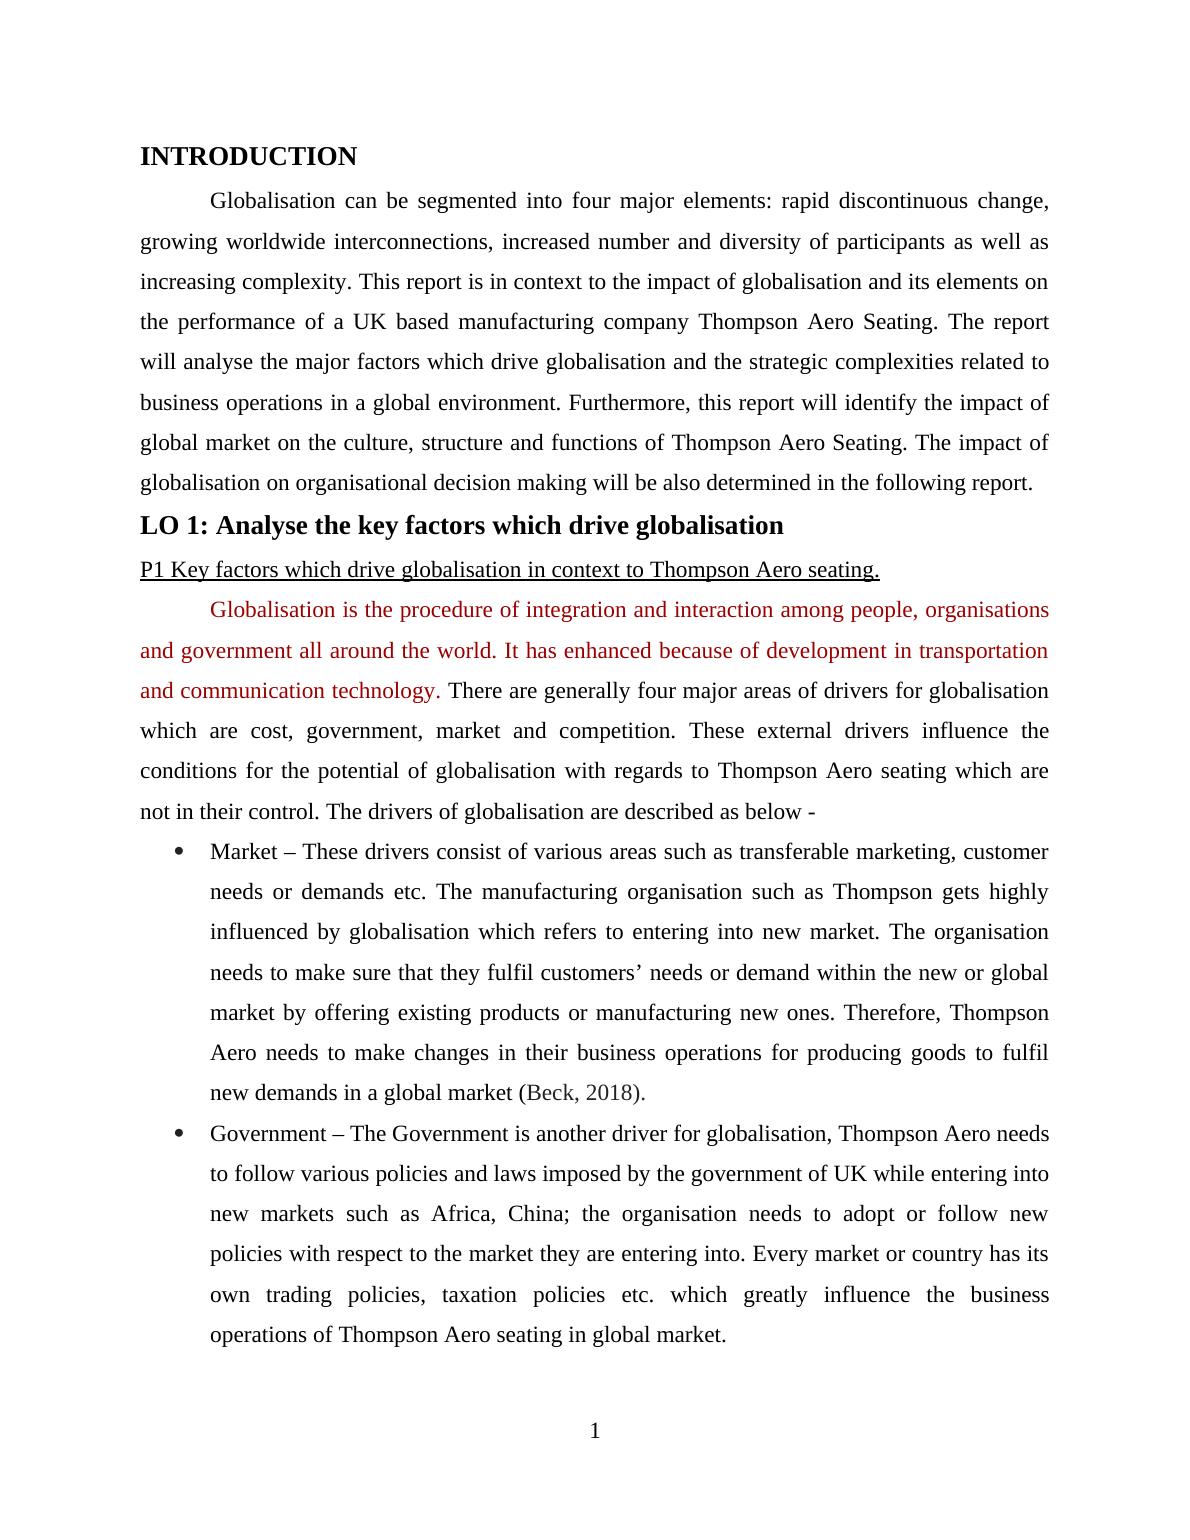 Drivers and Challenges for Globalisation Essay_3